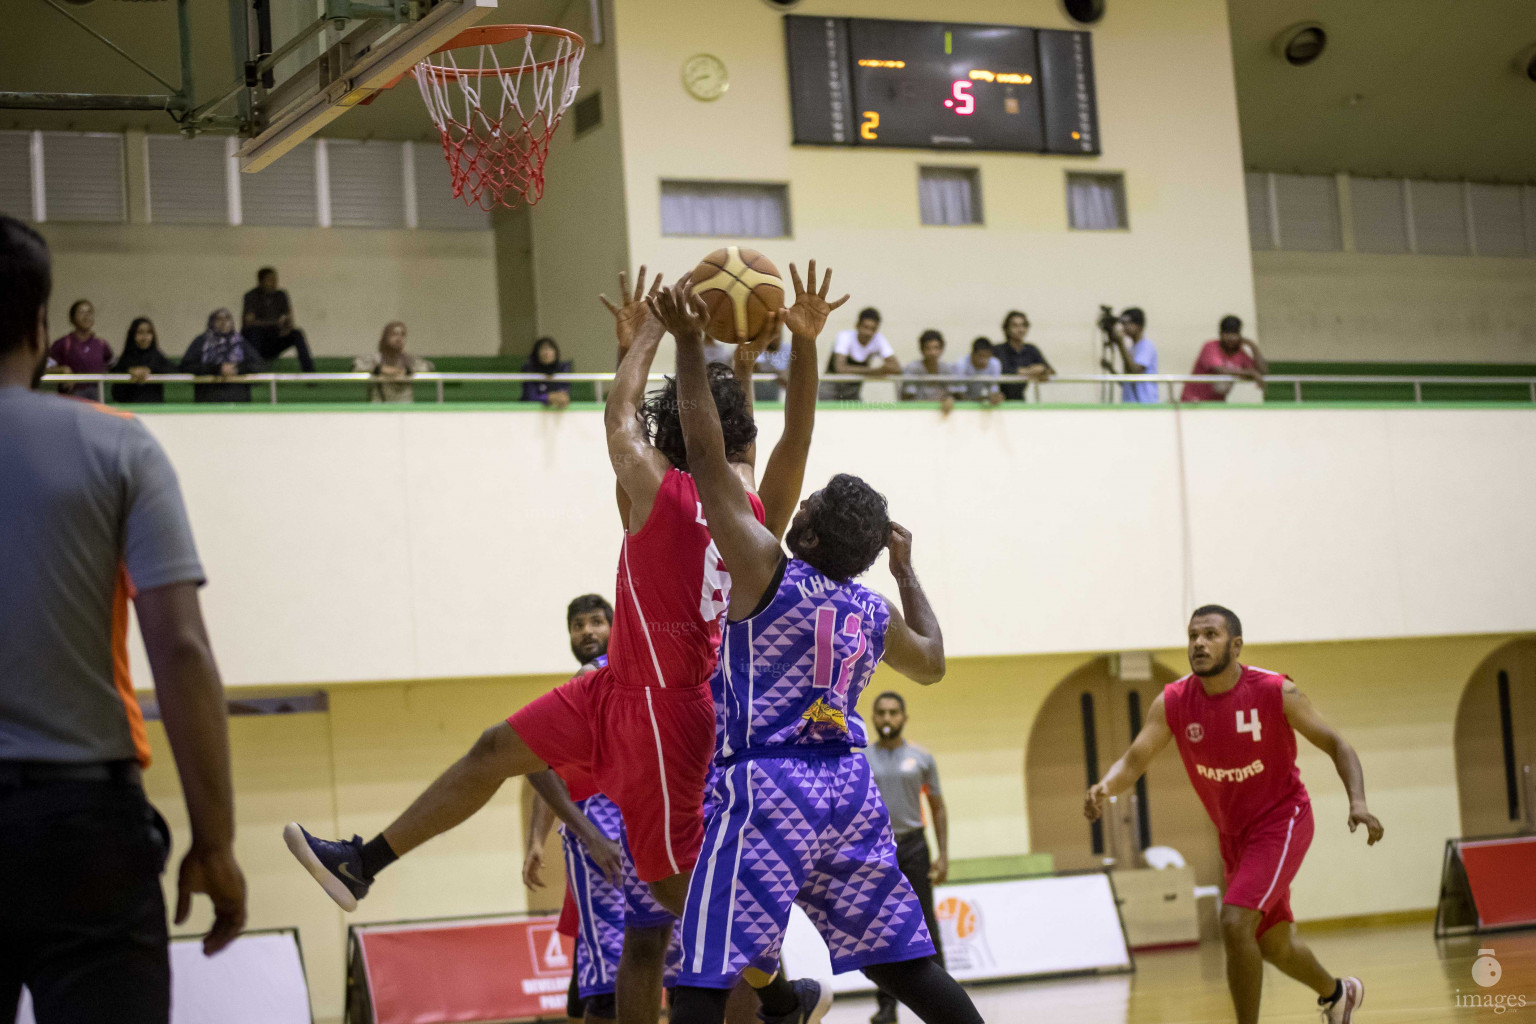 Kings BC vs Raptors BC in 27th MBA Championship 2019 (Men's Division) on Saturday, 16th February 2019 in Male', Maldives. Photos: Ismail Thoriq / images.mv